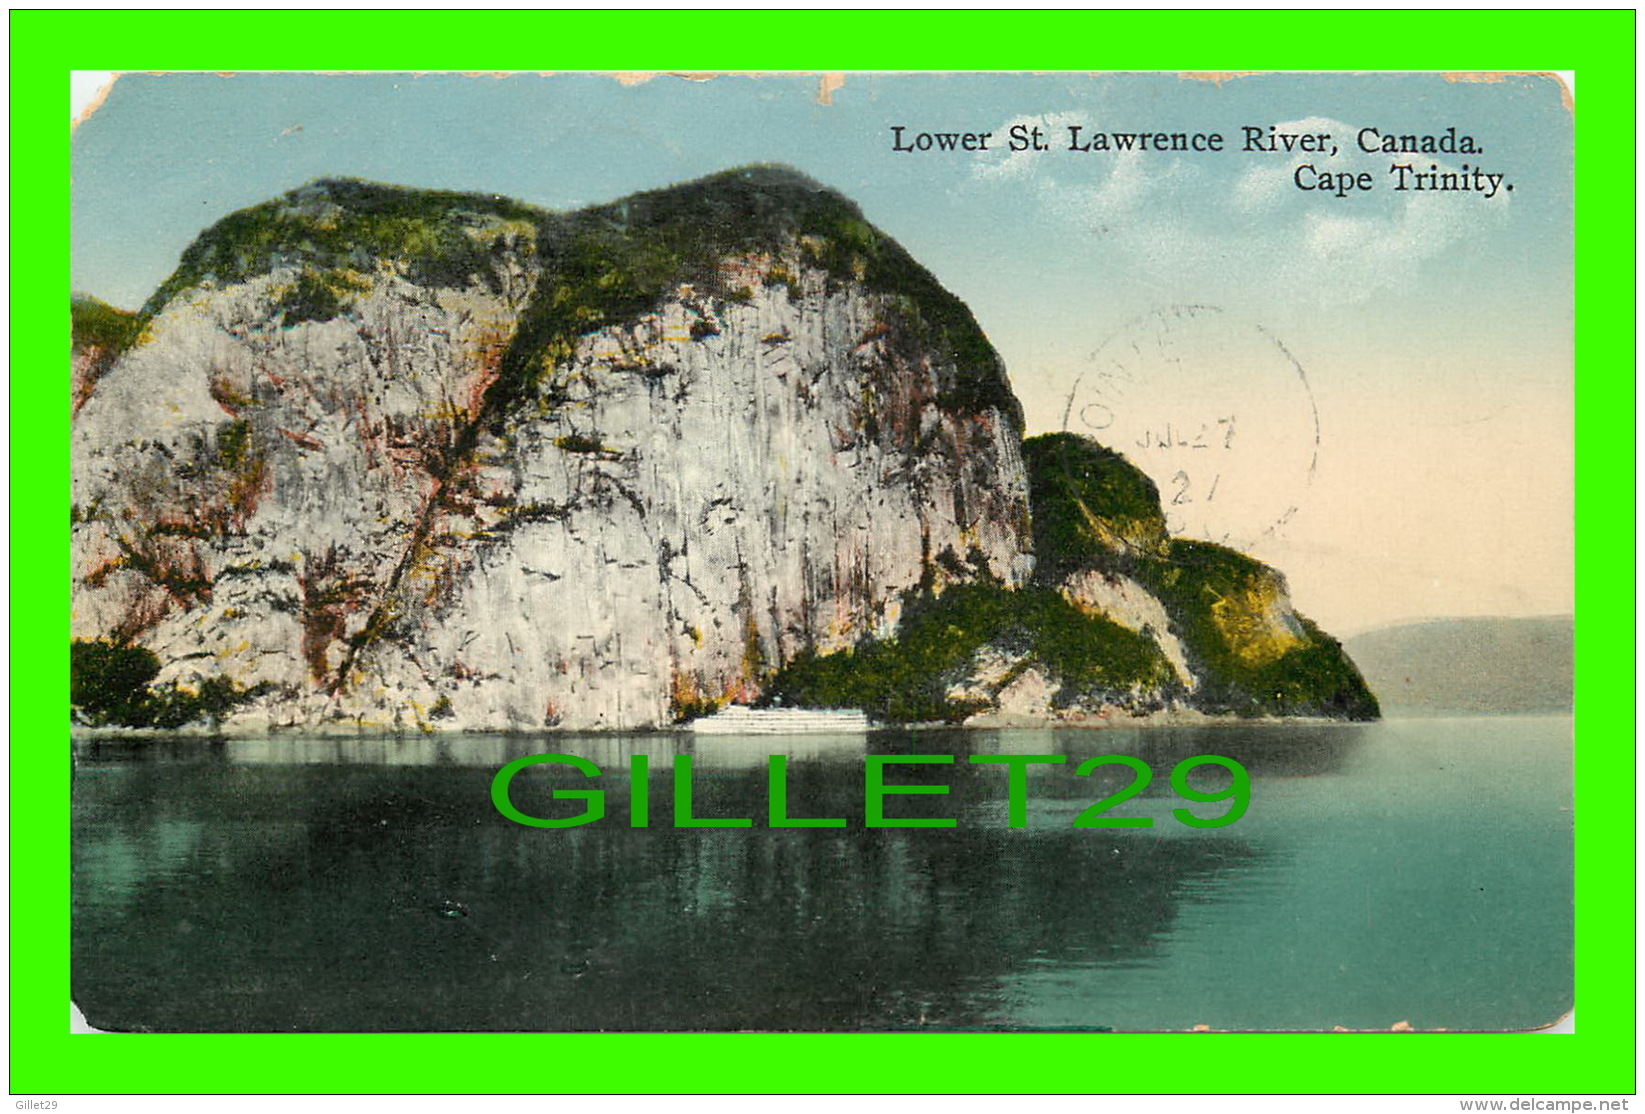 SAGUENAY, QUÉBEC - LOWER ST LAWRENCE RIVER, CAPE TRINITY - ANIMATED SHIP - TRAVEL IN 1927 - NOVELTY MFG &amp; ART CO - - Saguenay